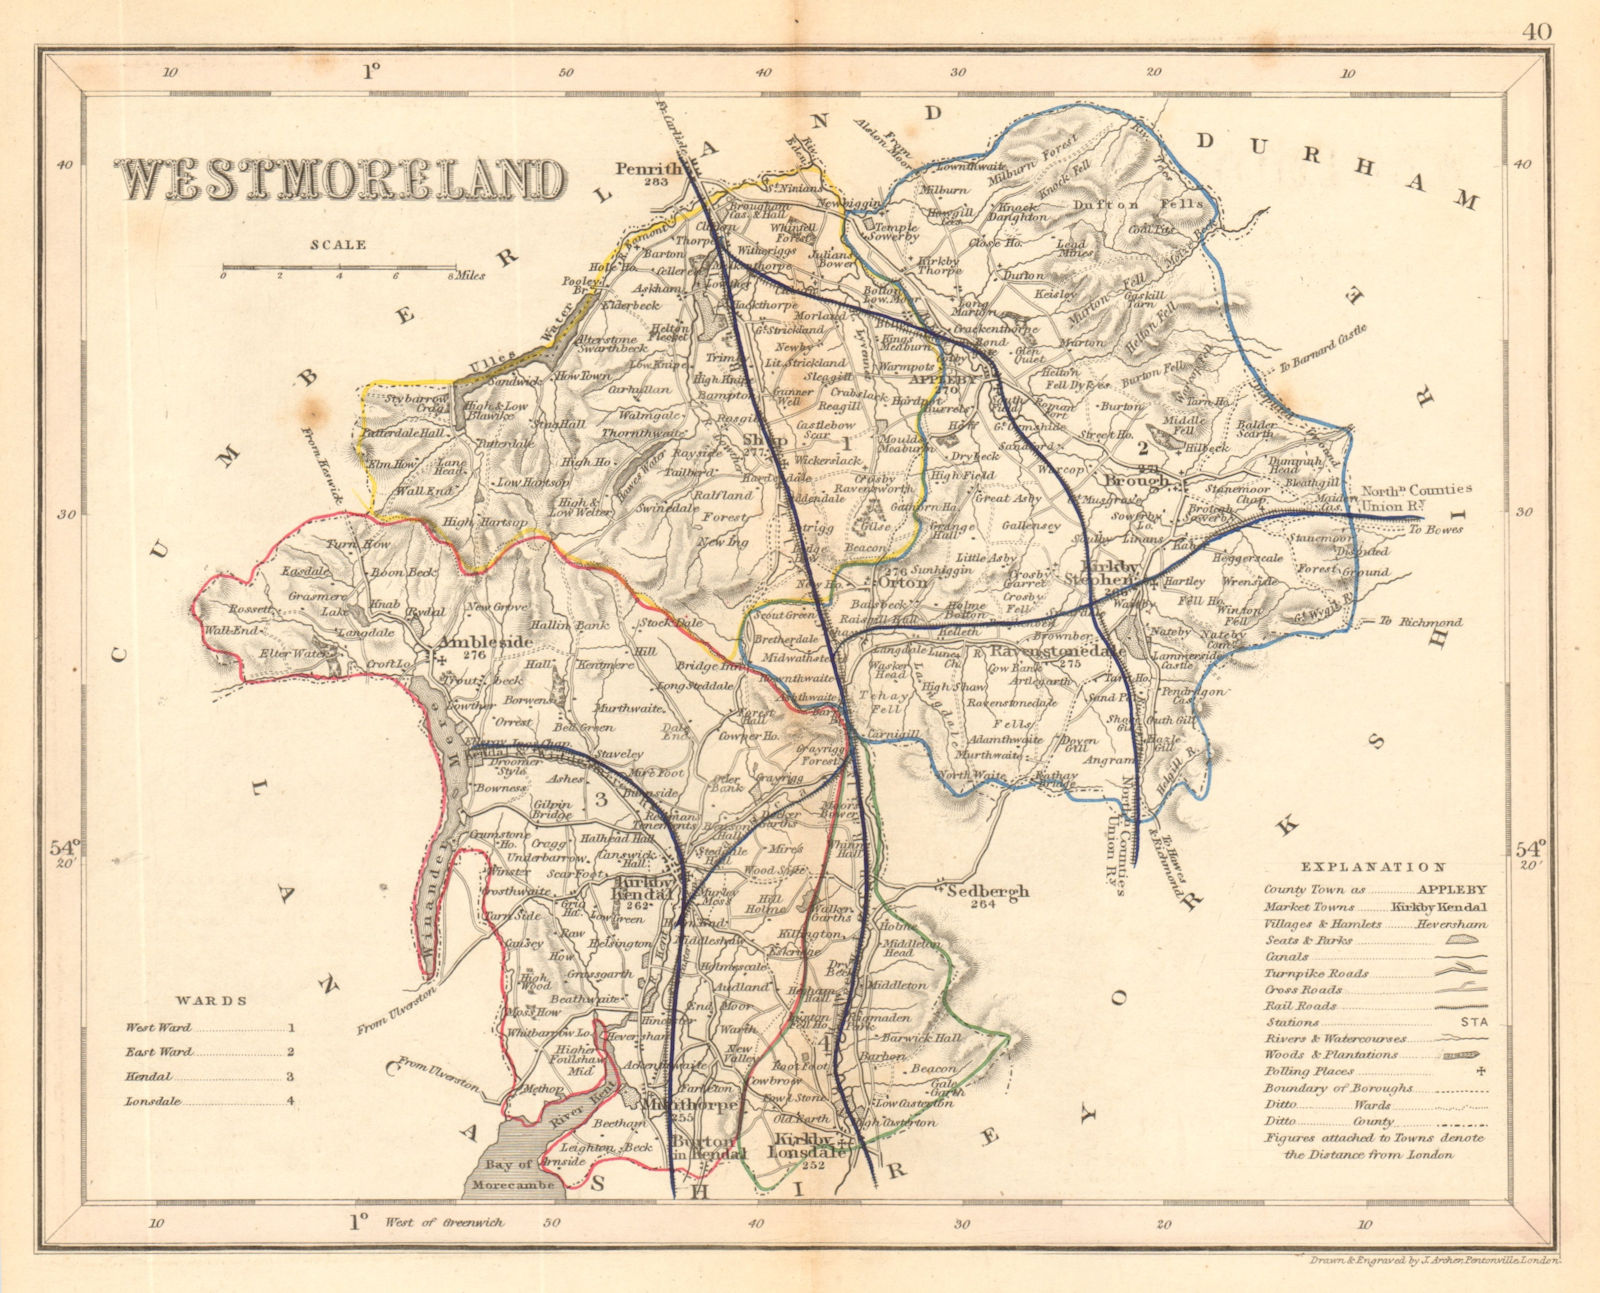 WESTMORELAND county map by ARCHER & DUGDALE. Lake District. Canals seats c1845